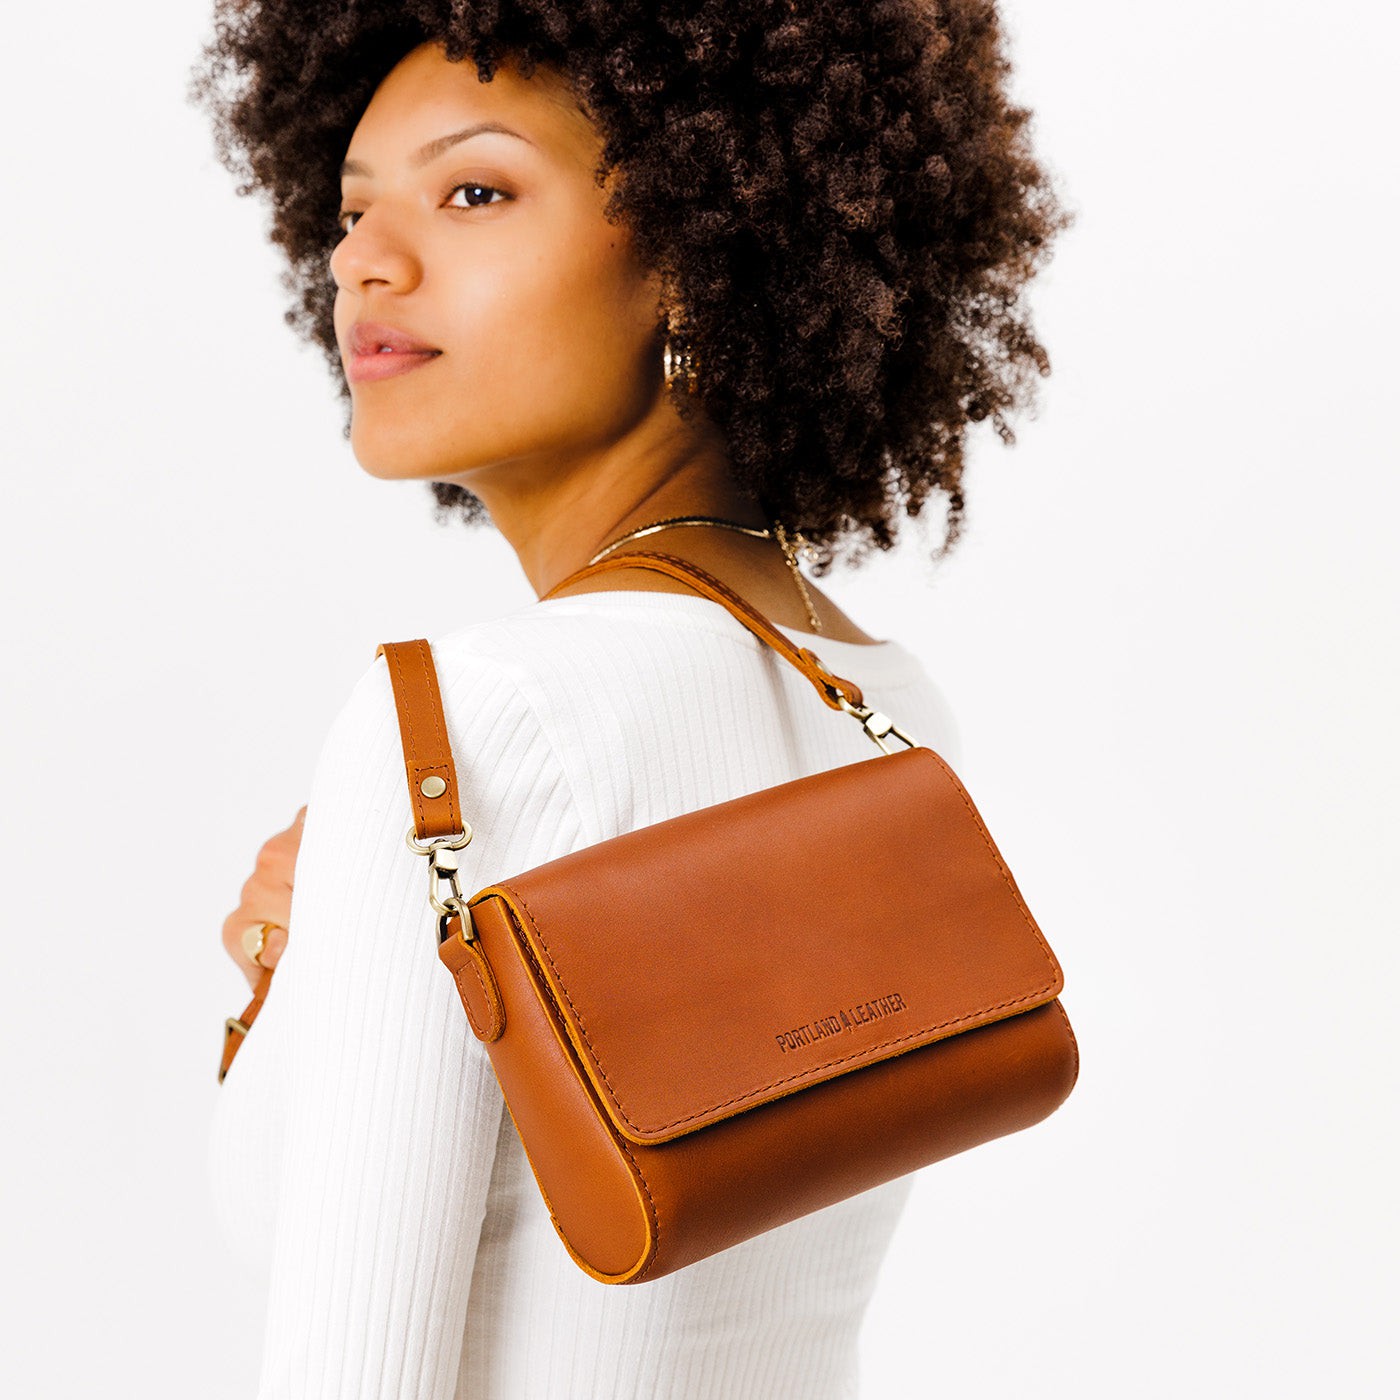 Honey*Mini | Model Wearing Small Leather Crossbody Bag with Magnetic Messenger Bag Closure